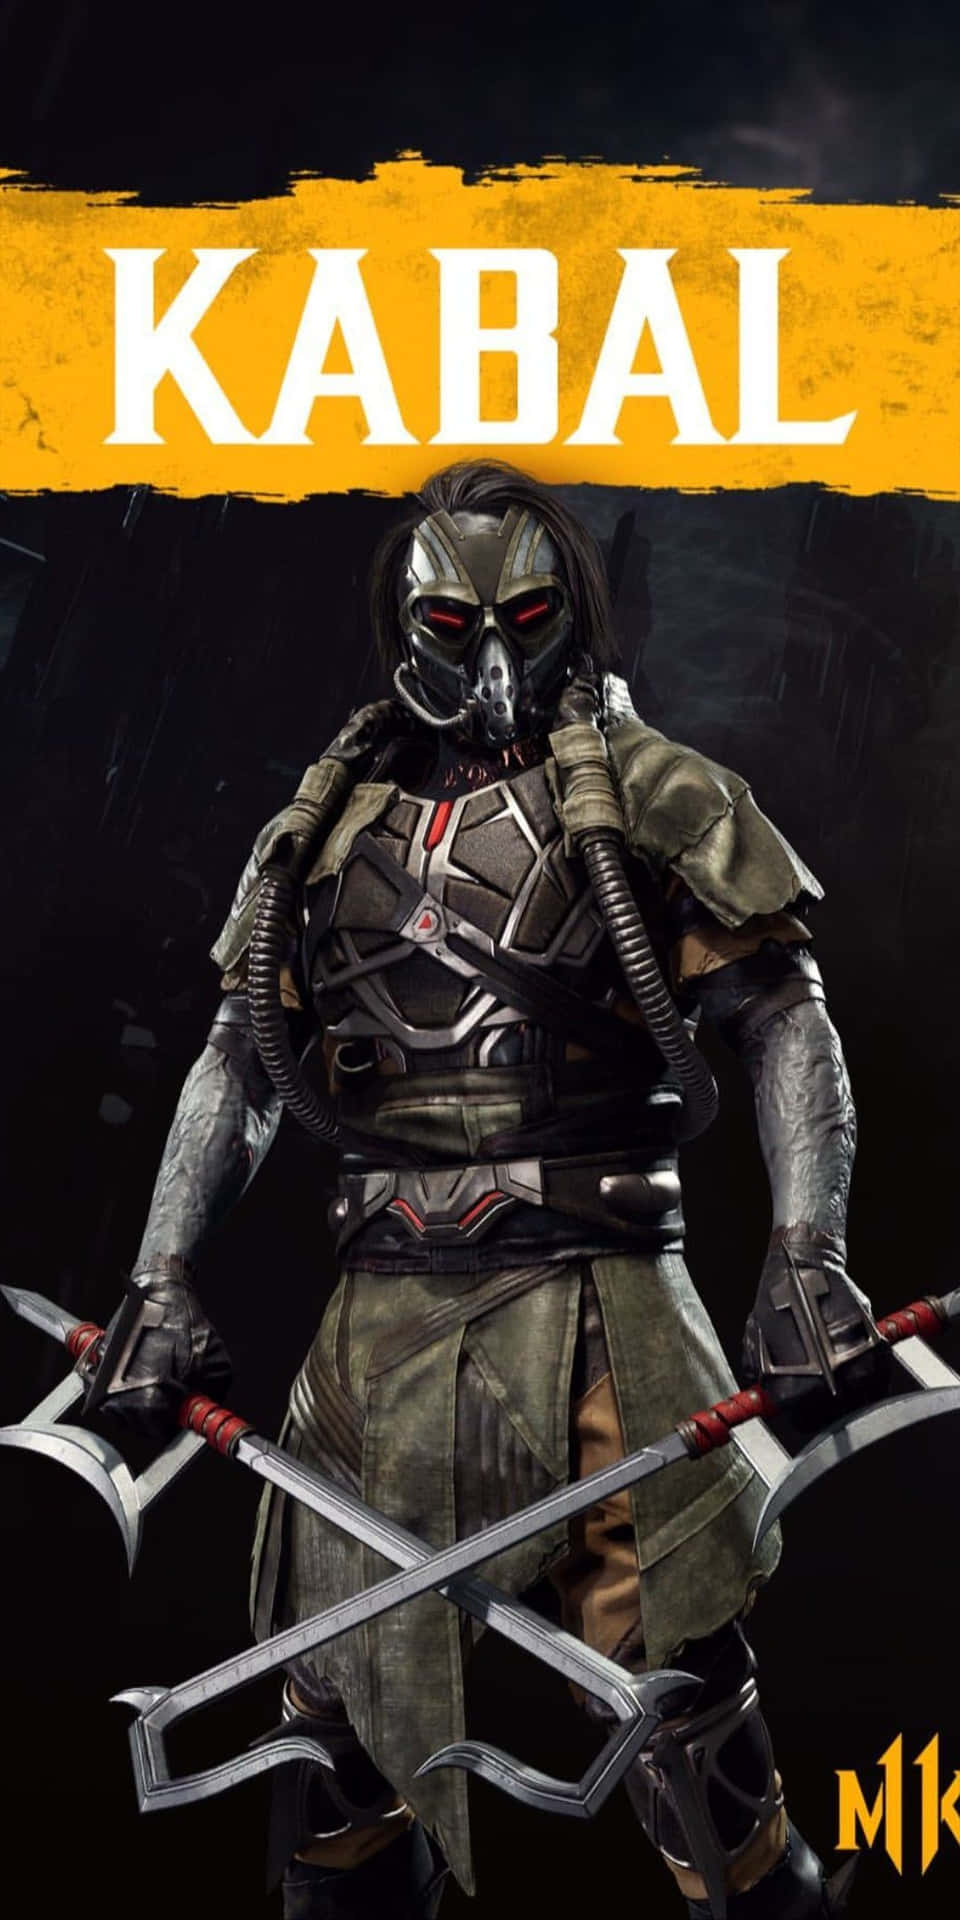 Kabal Unleashes His Deadly Powers in Mortal Kombat Wallpaper